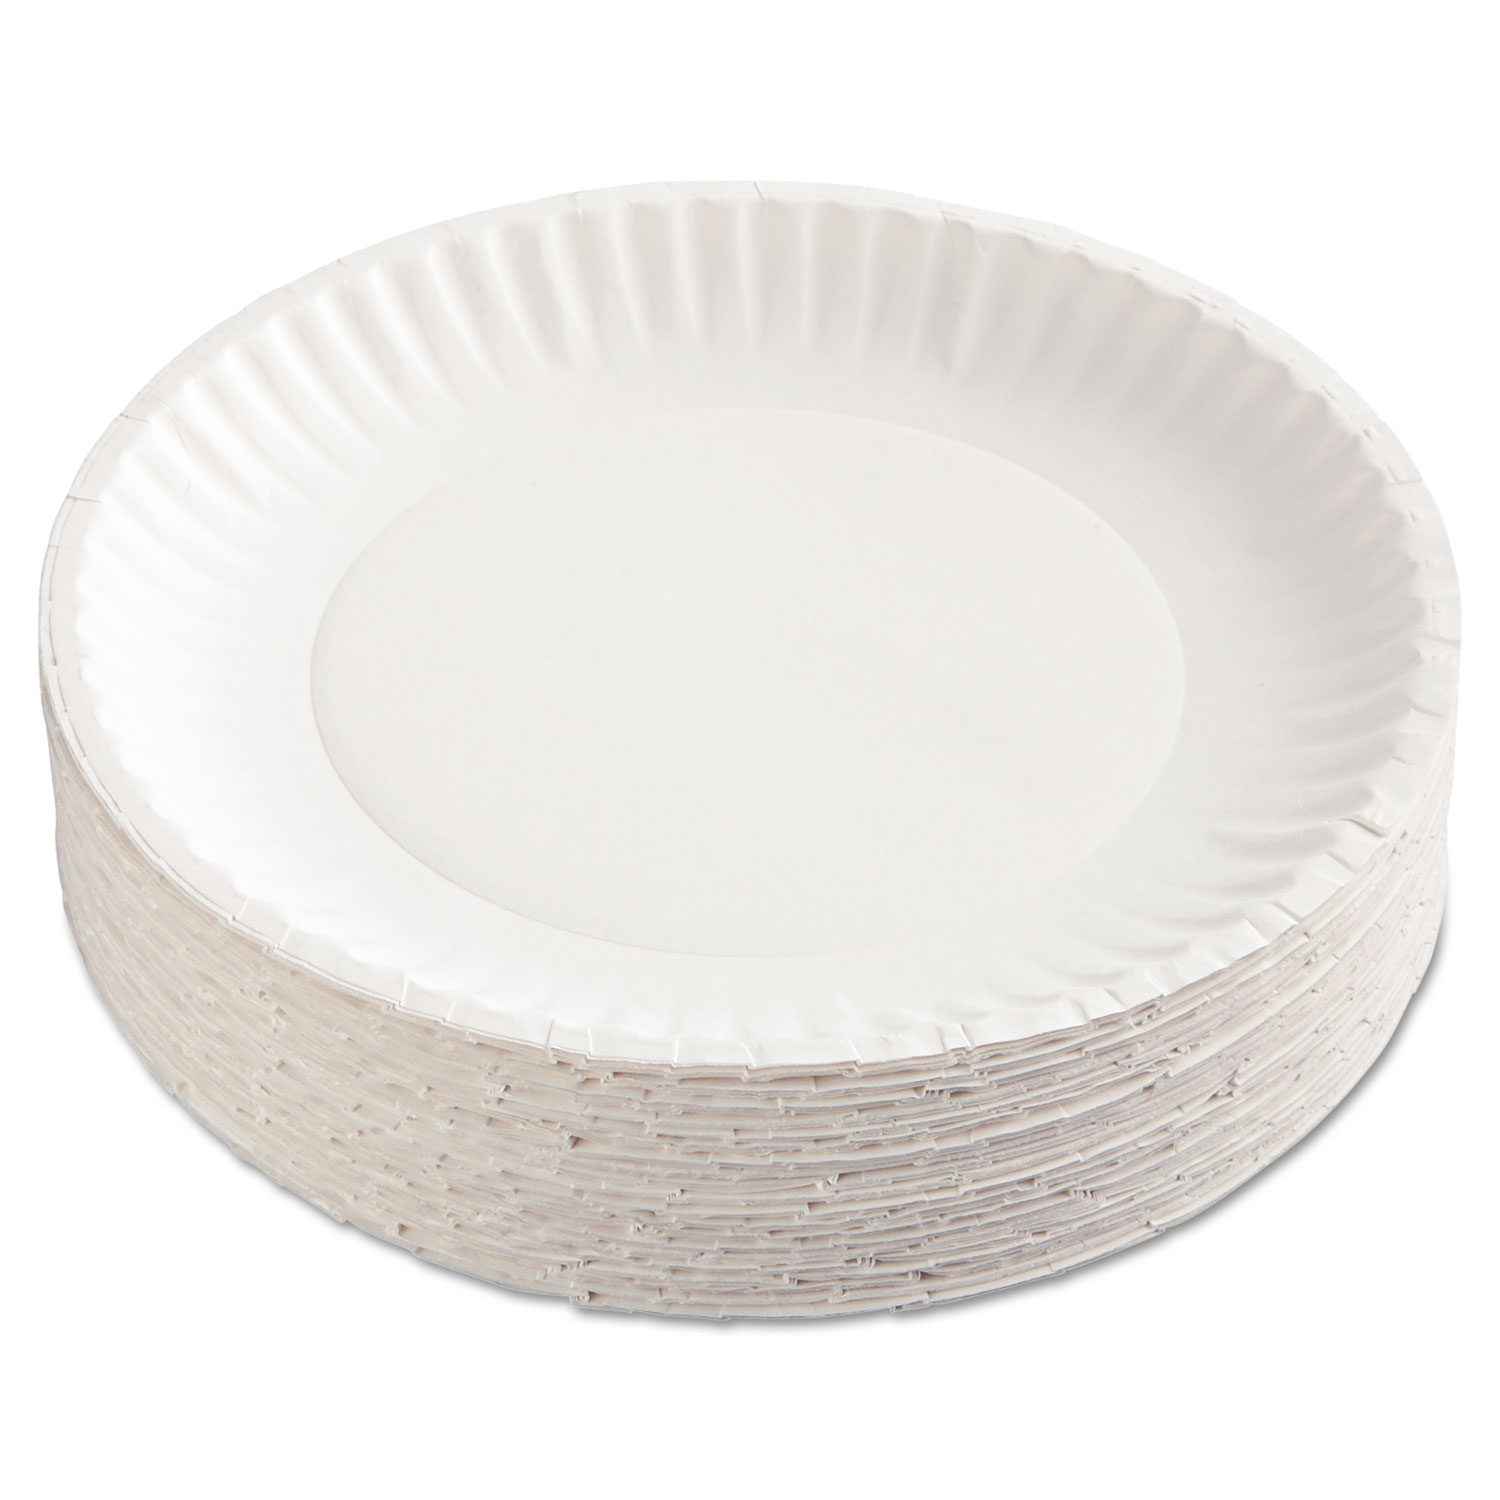  AJM Packaging Corporation AJM CP9GOEWH Gold Label Coated Paper Plates, 9 dia, White, 100/Pack, 10 Packs/Carton (AJMCP9GOEWH) 